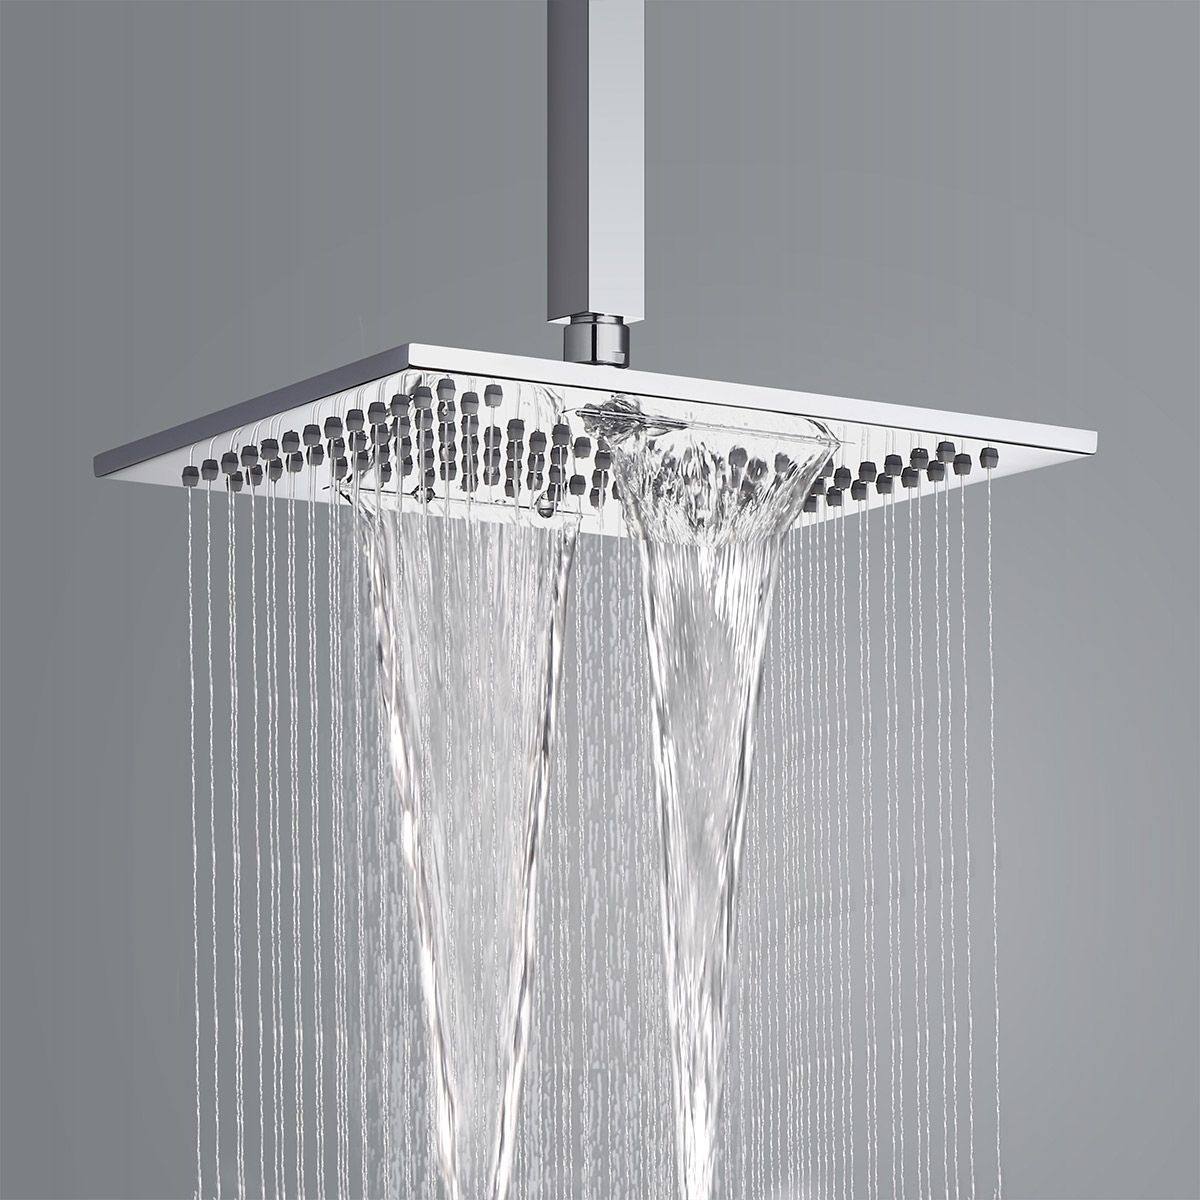 10 Waterfall Square Rain Shower Head Two Functional In Polished Chrome